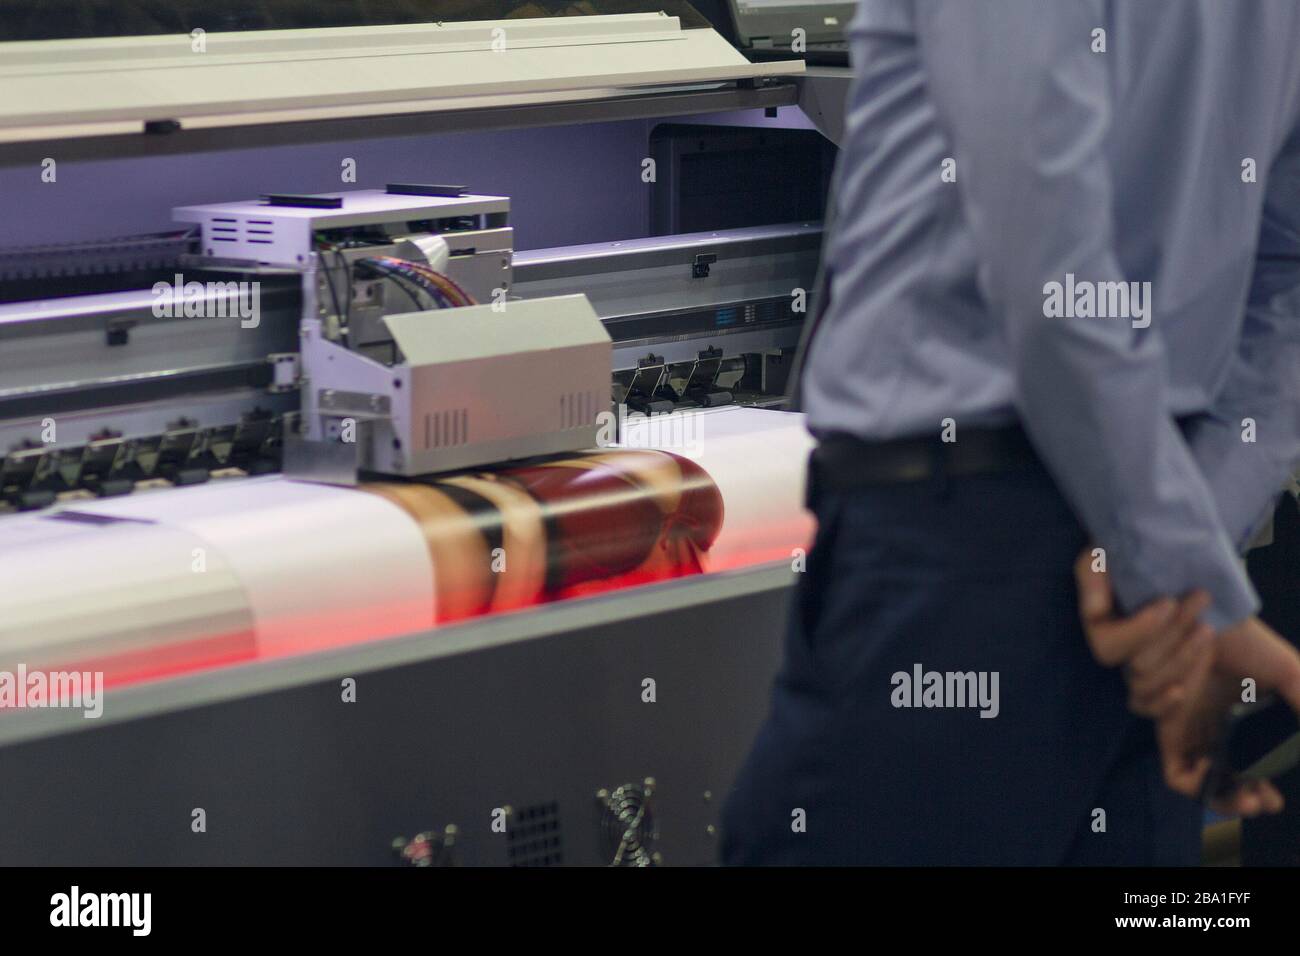 Large-format printing machine in the printing house. Industry Stock Photo